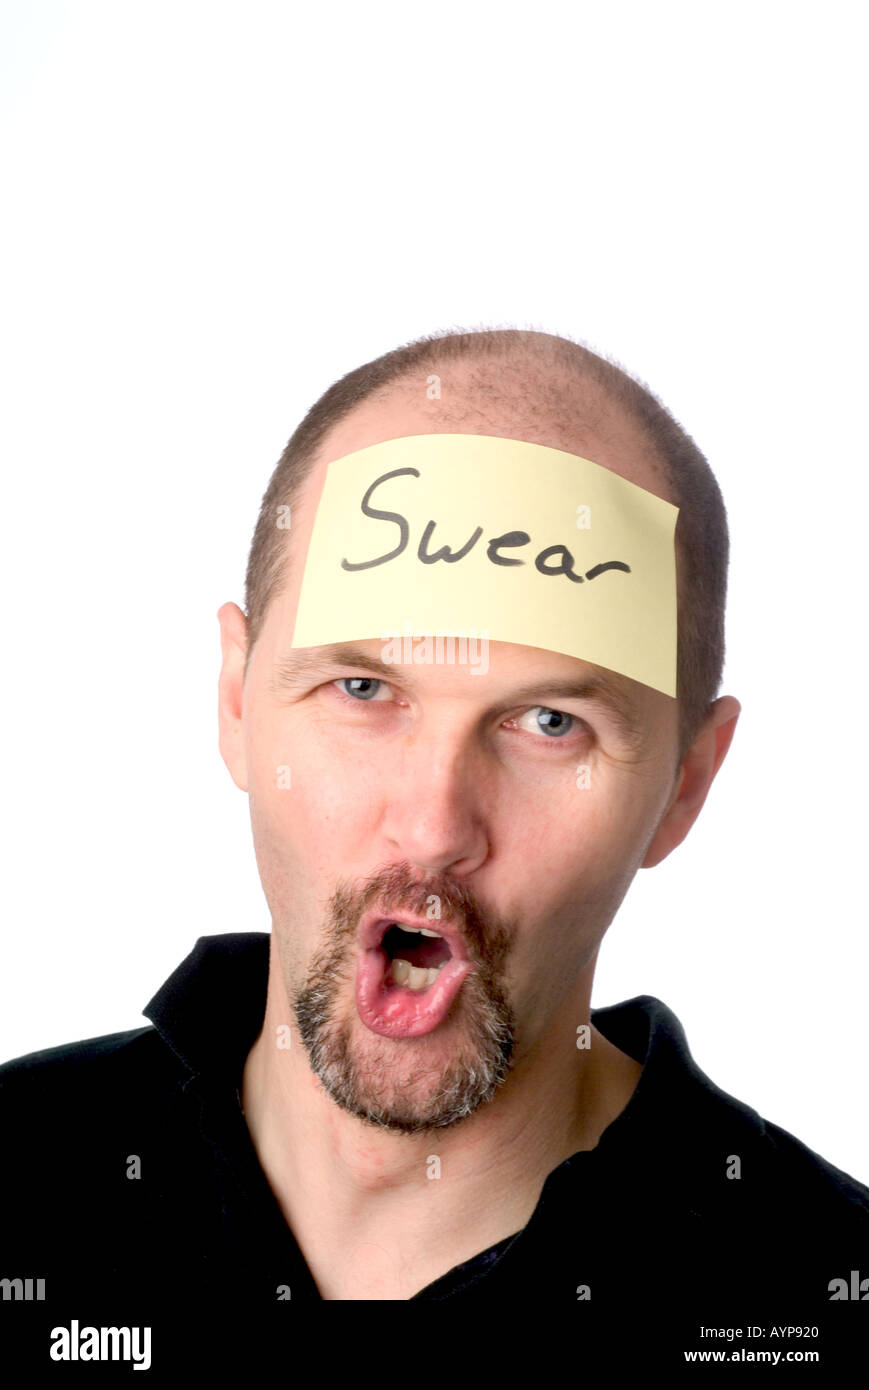 Man With Post It Note On Head Depicting Swearing Bad Language Stock